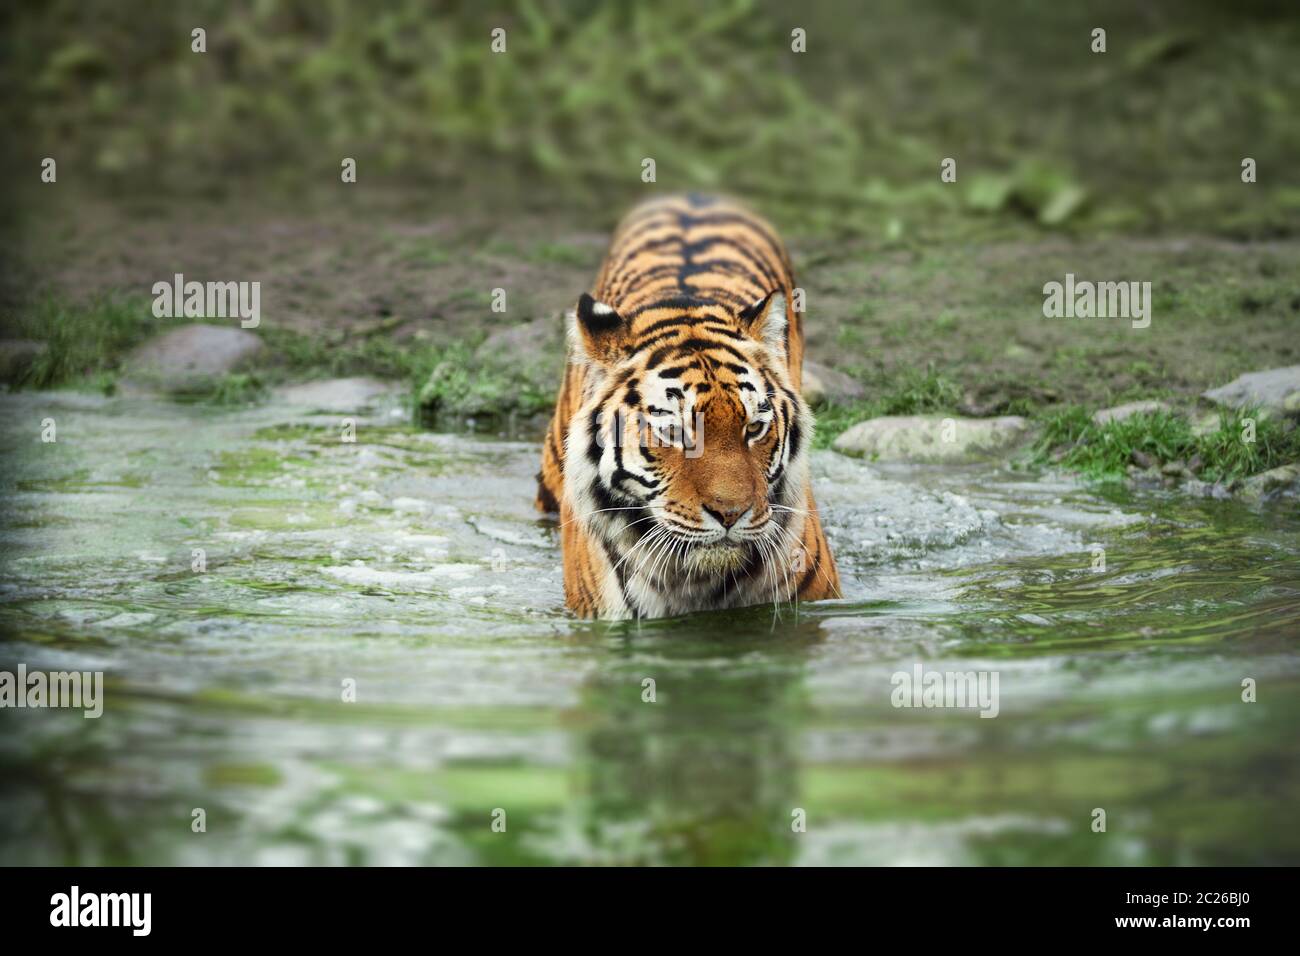 Tiger walking into the water. Nature and animal welfare concept. Stock Photo